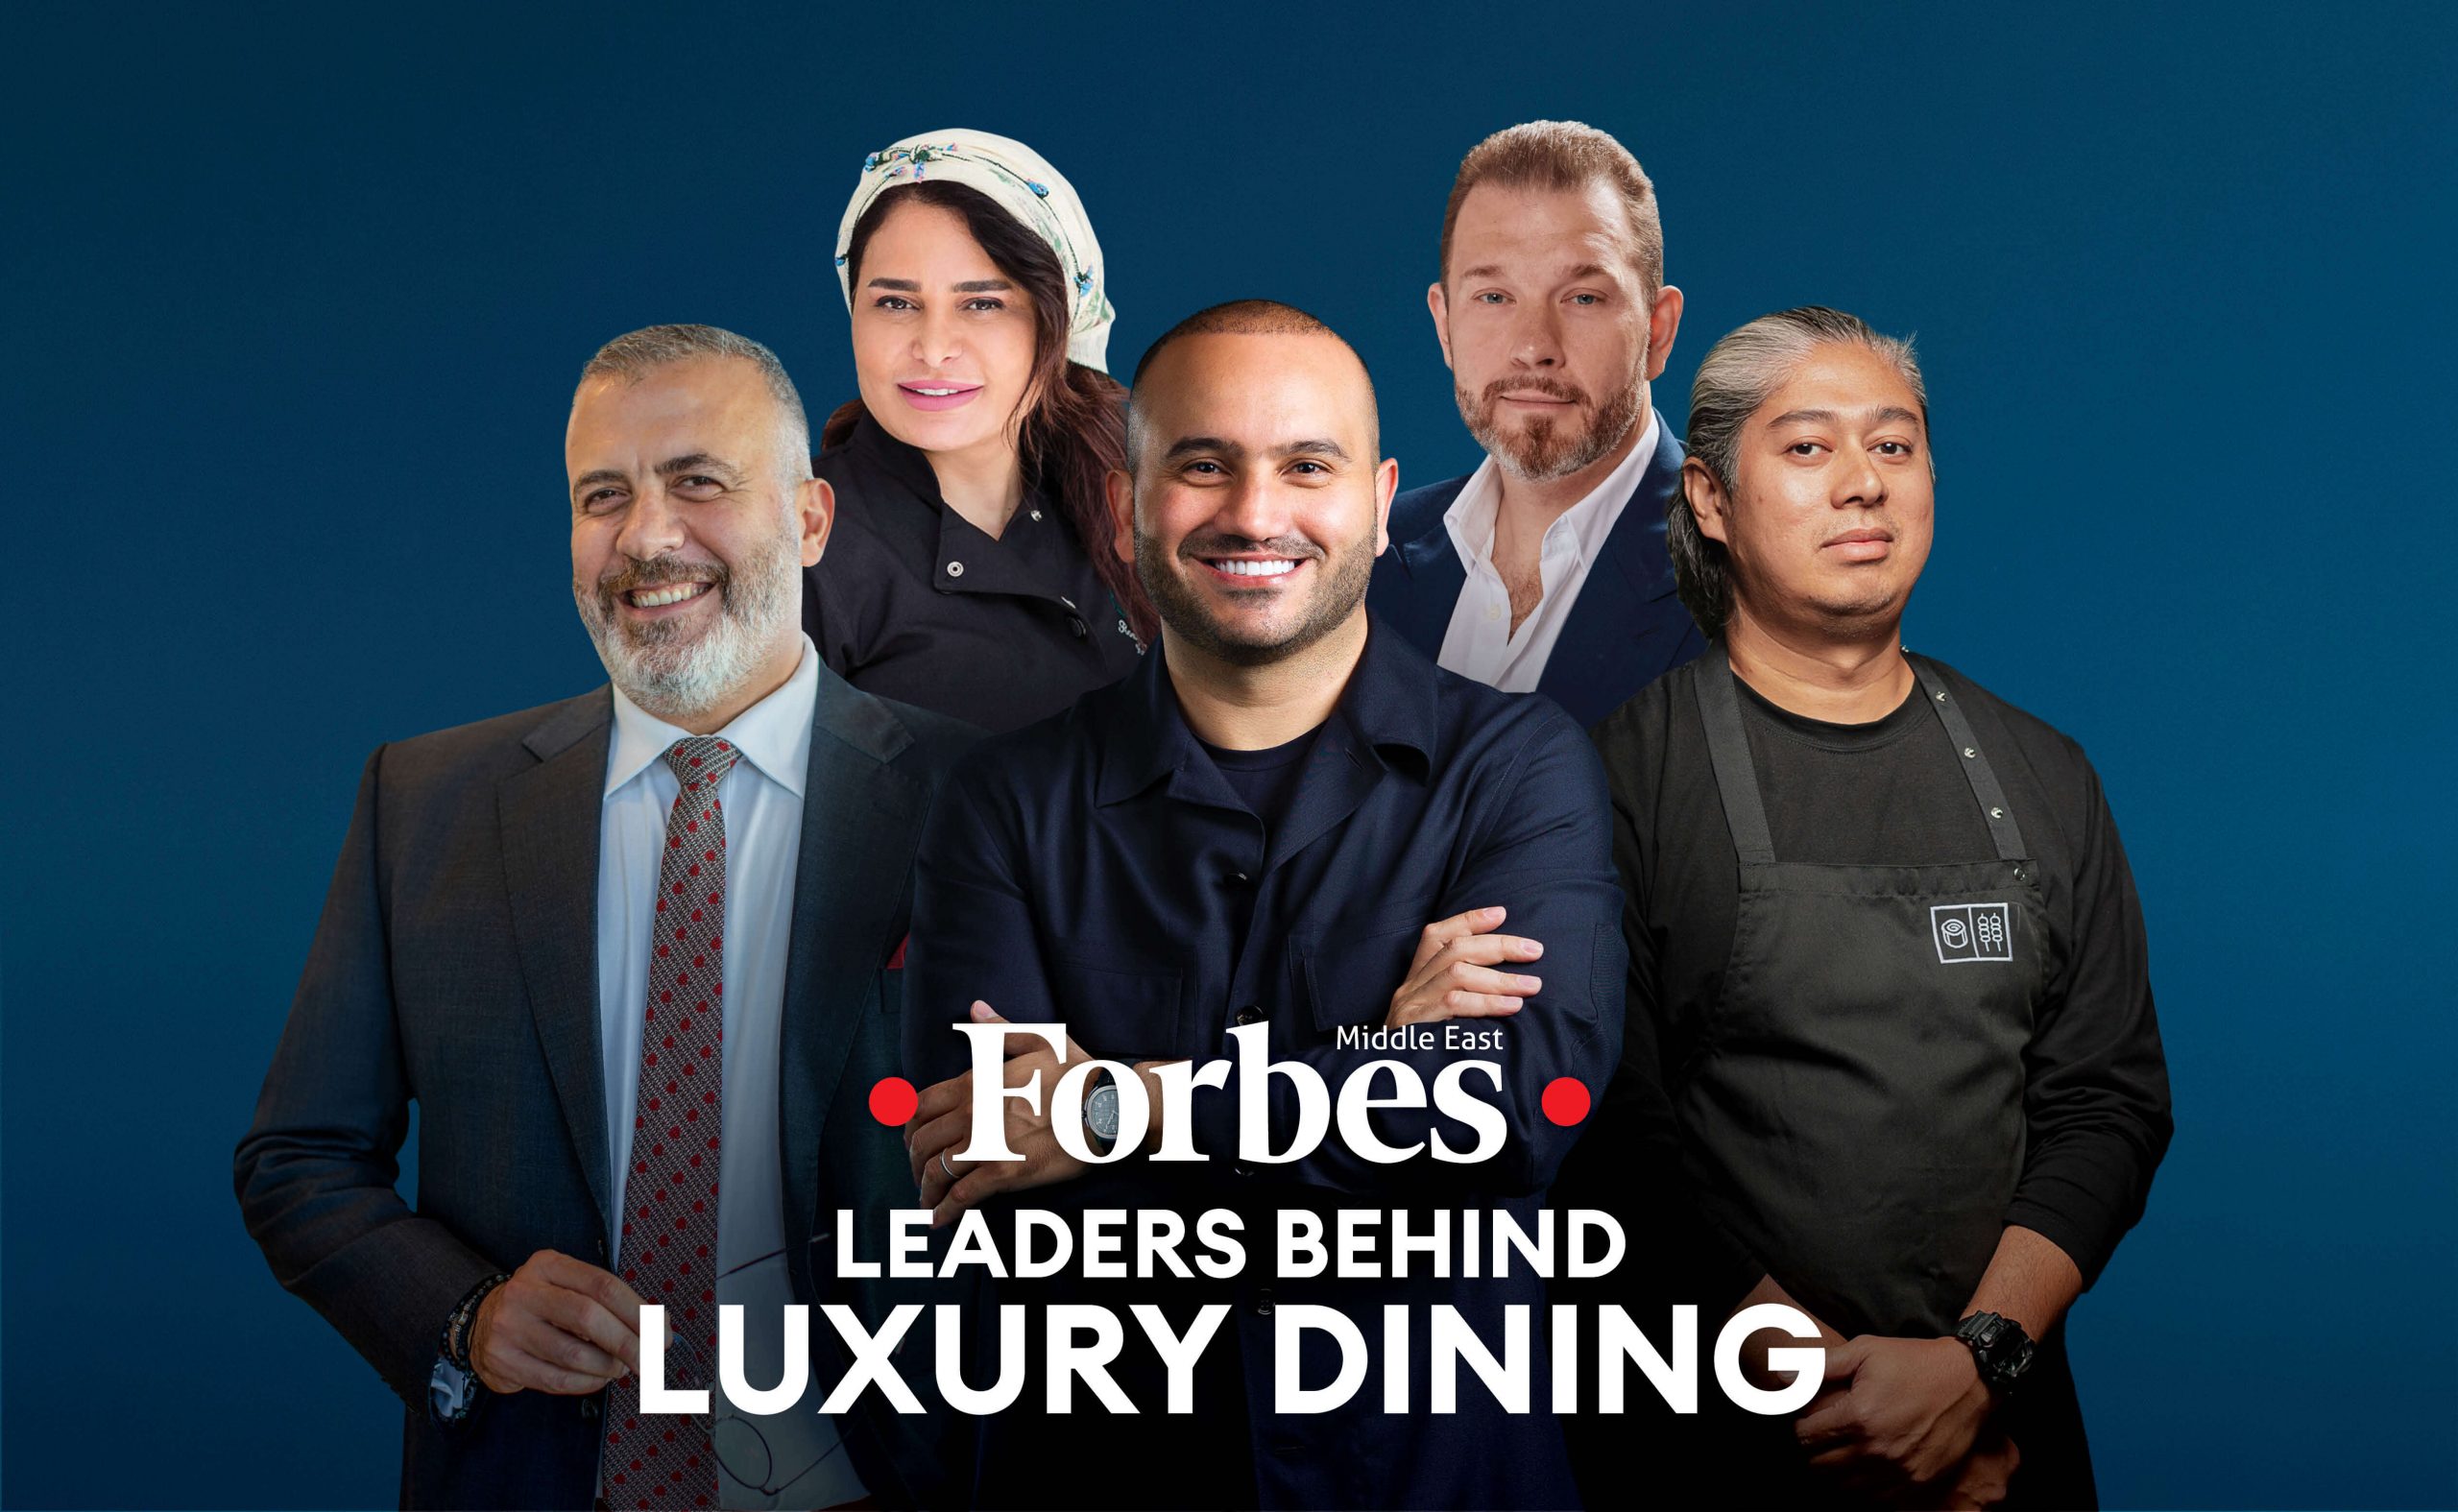 LEADERS BEHIND LUXURY DINING IN THE MIDDLE EAST